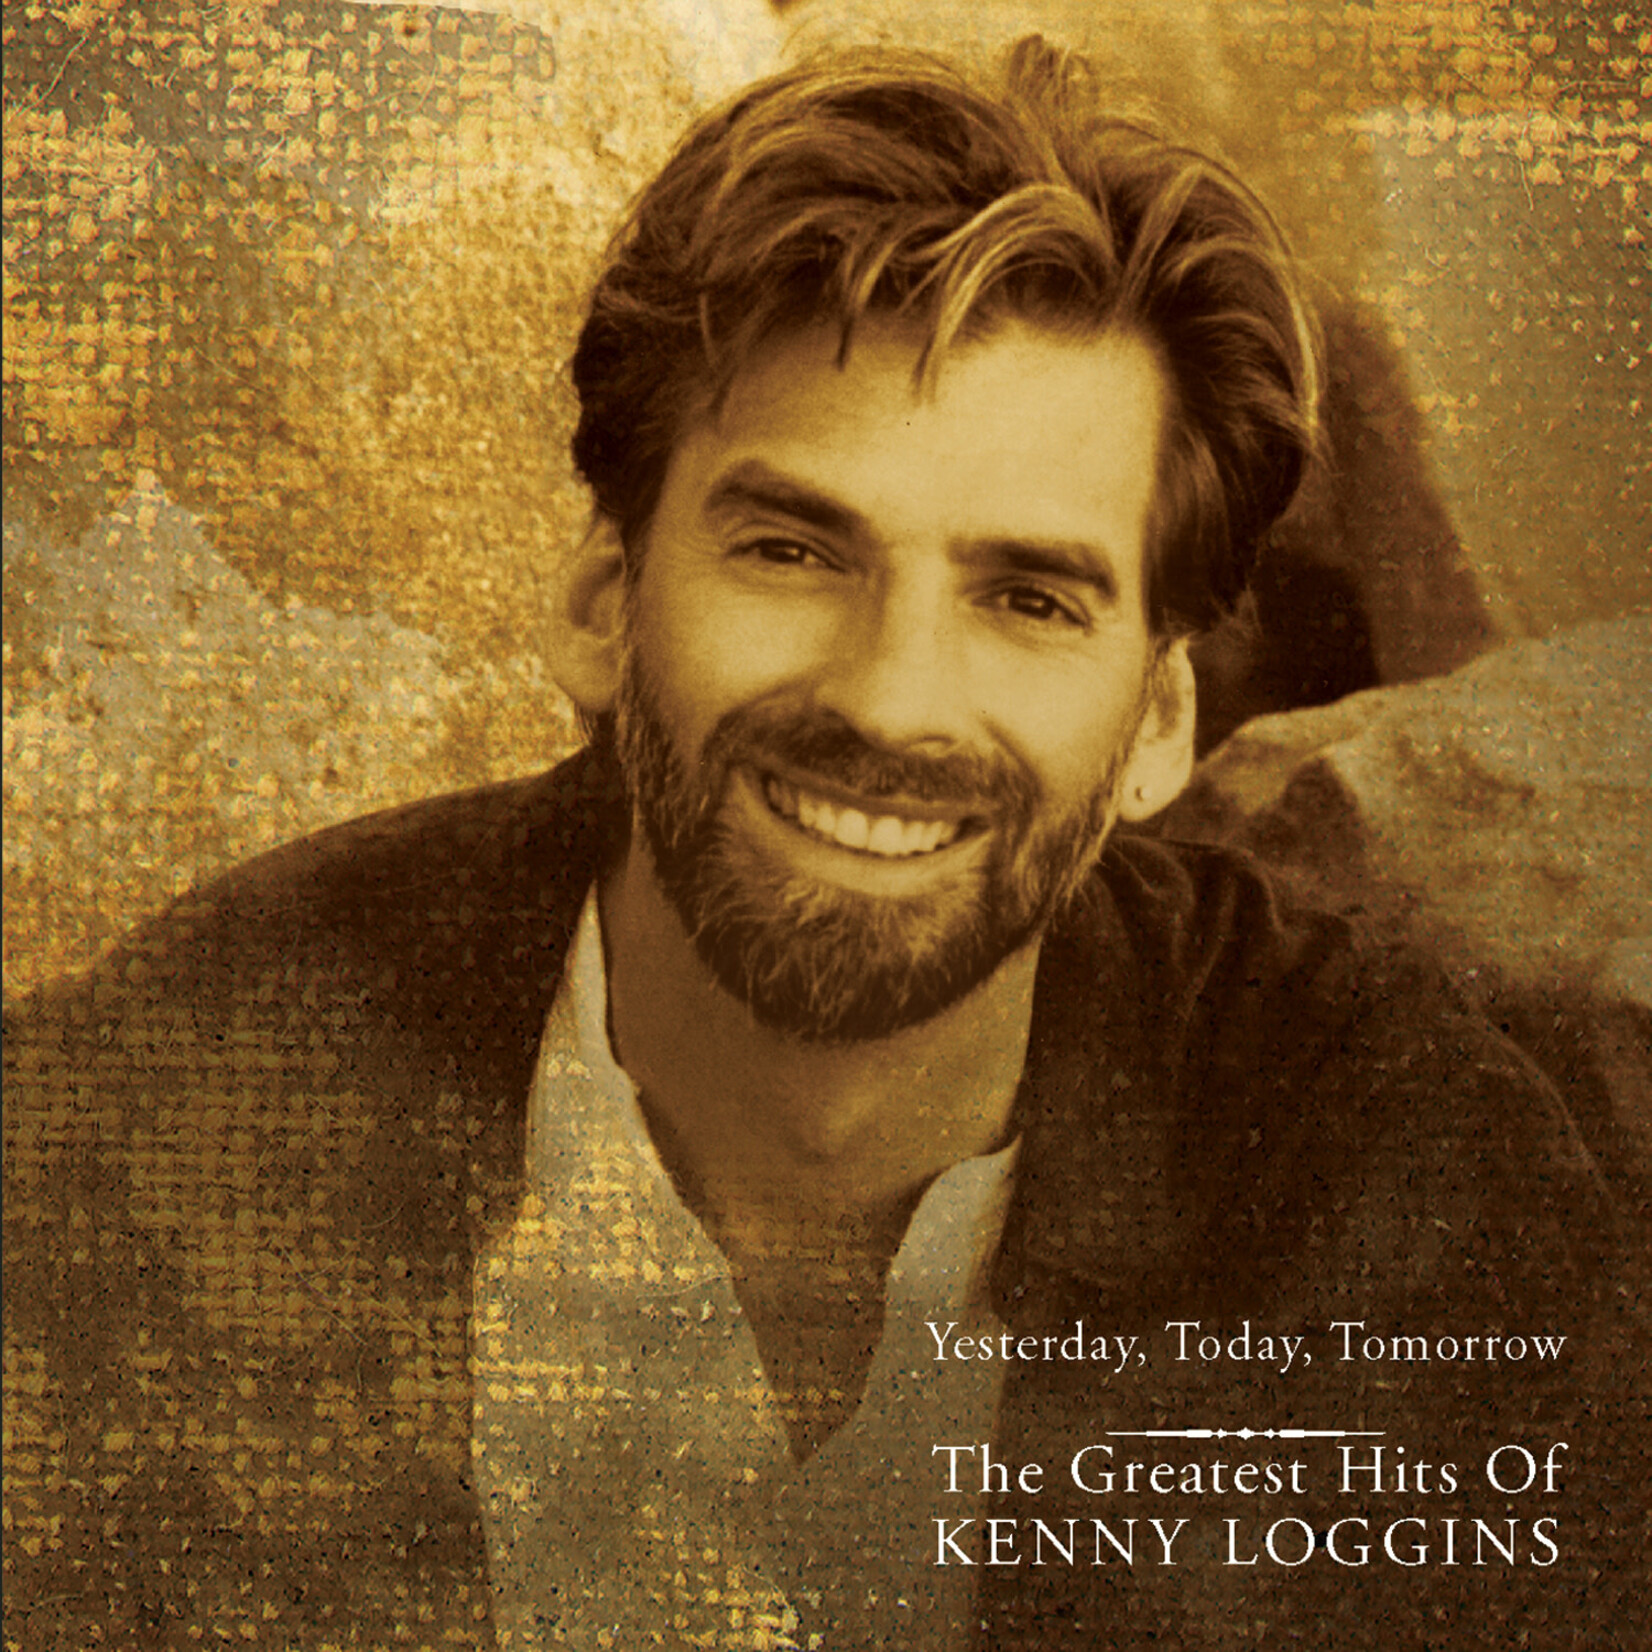 Kenny Loggins - Yesterday, Today, Tomorrow: The Greatest Hits Of Kenny Loggins [USED CD]